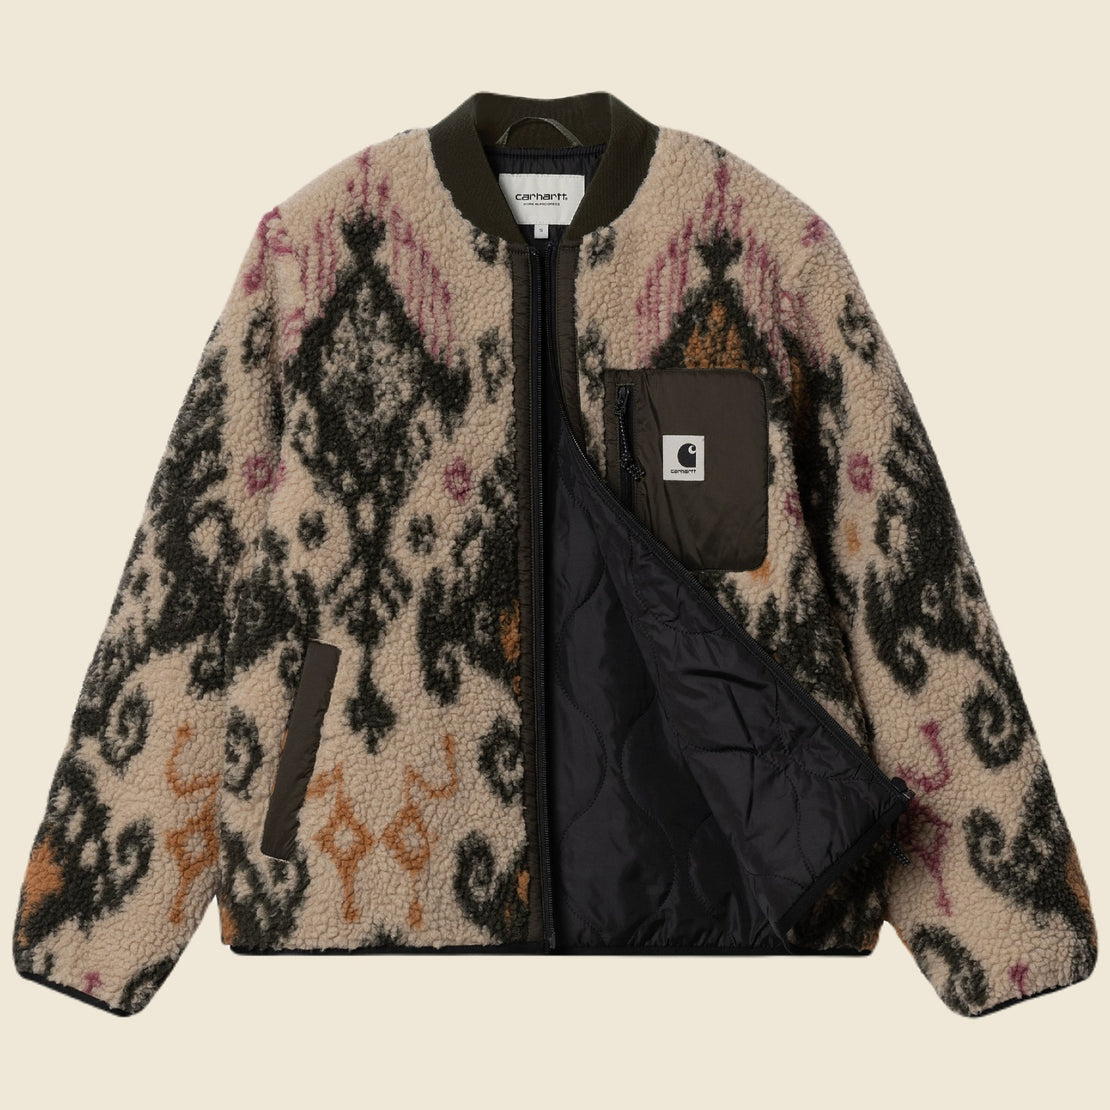 Janet Liner - Baru Jacquard - Carhartt WIP - STAG Provisions - W - Outerwear - Coat/Jacket